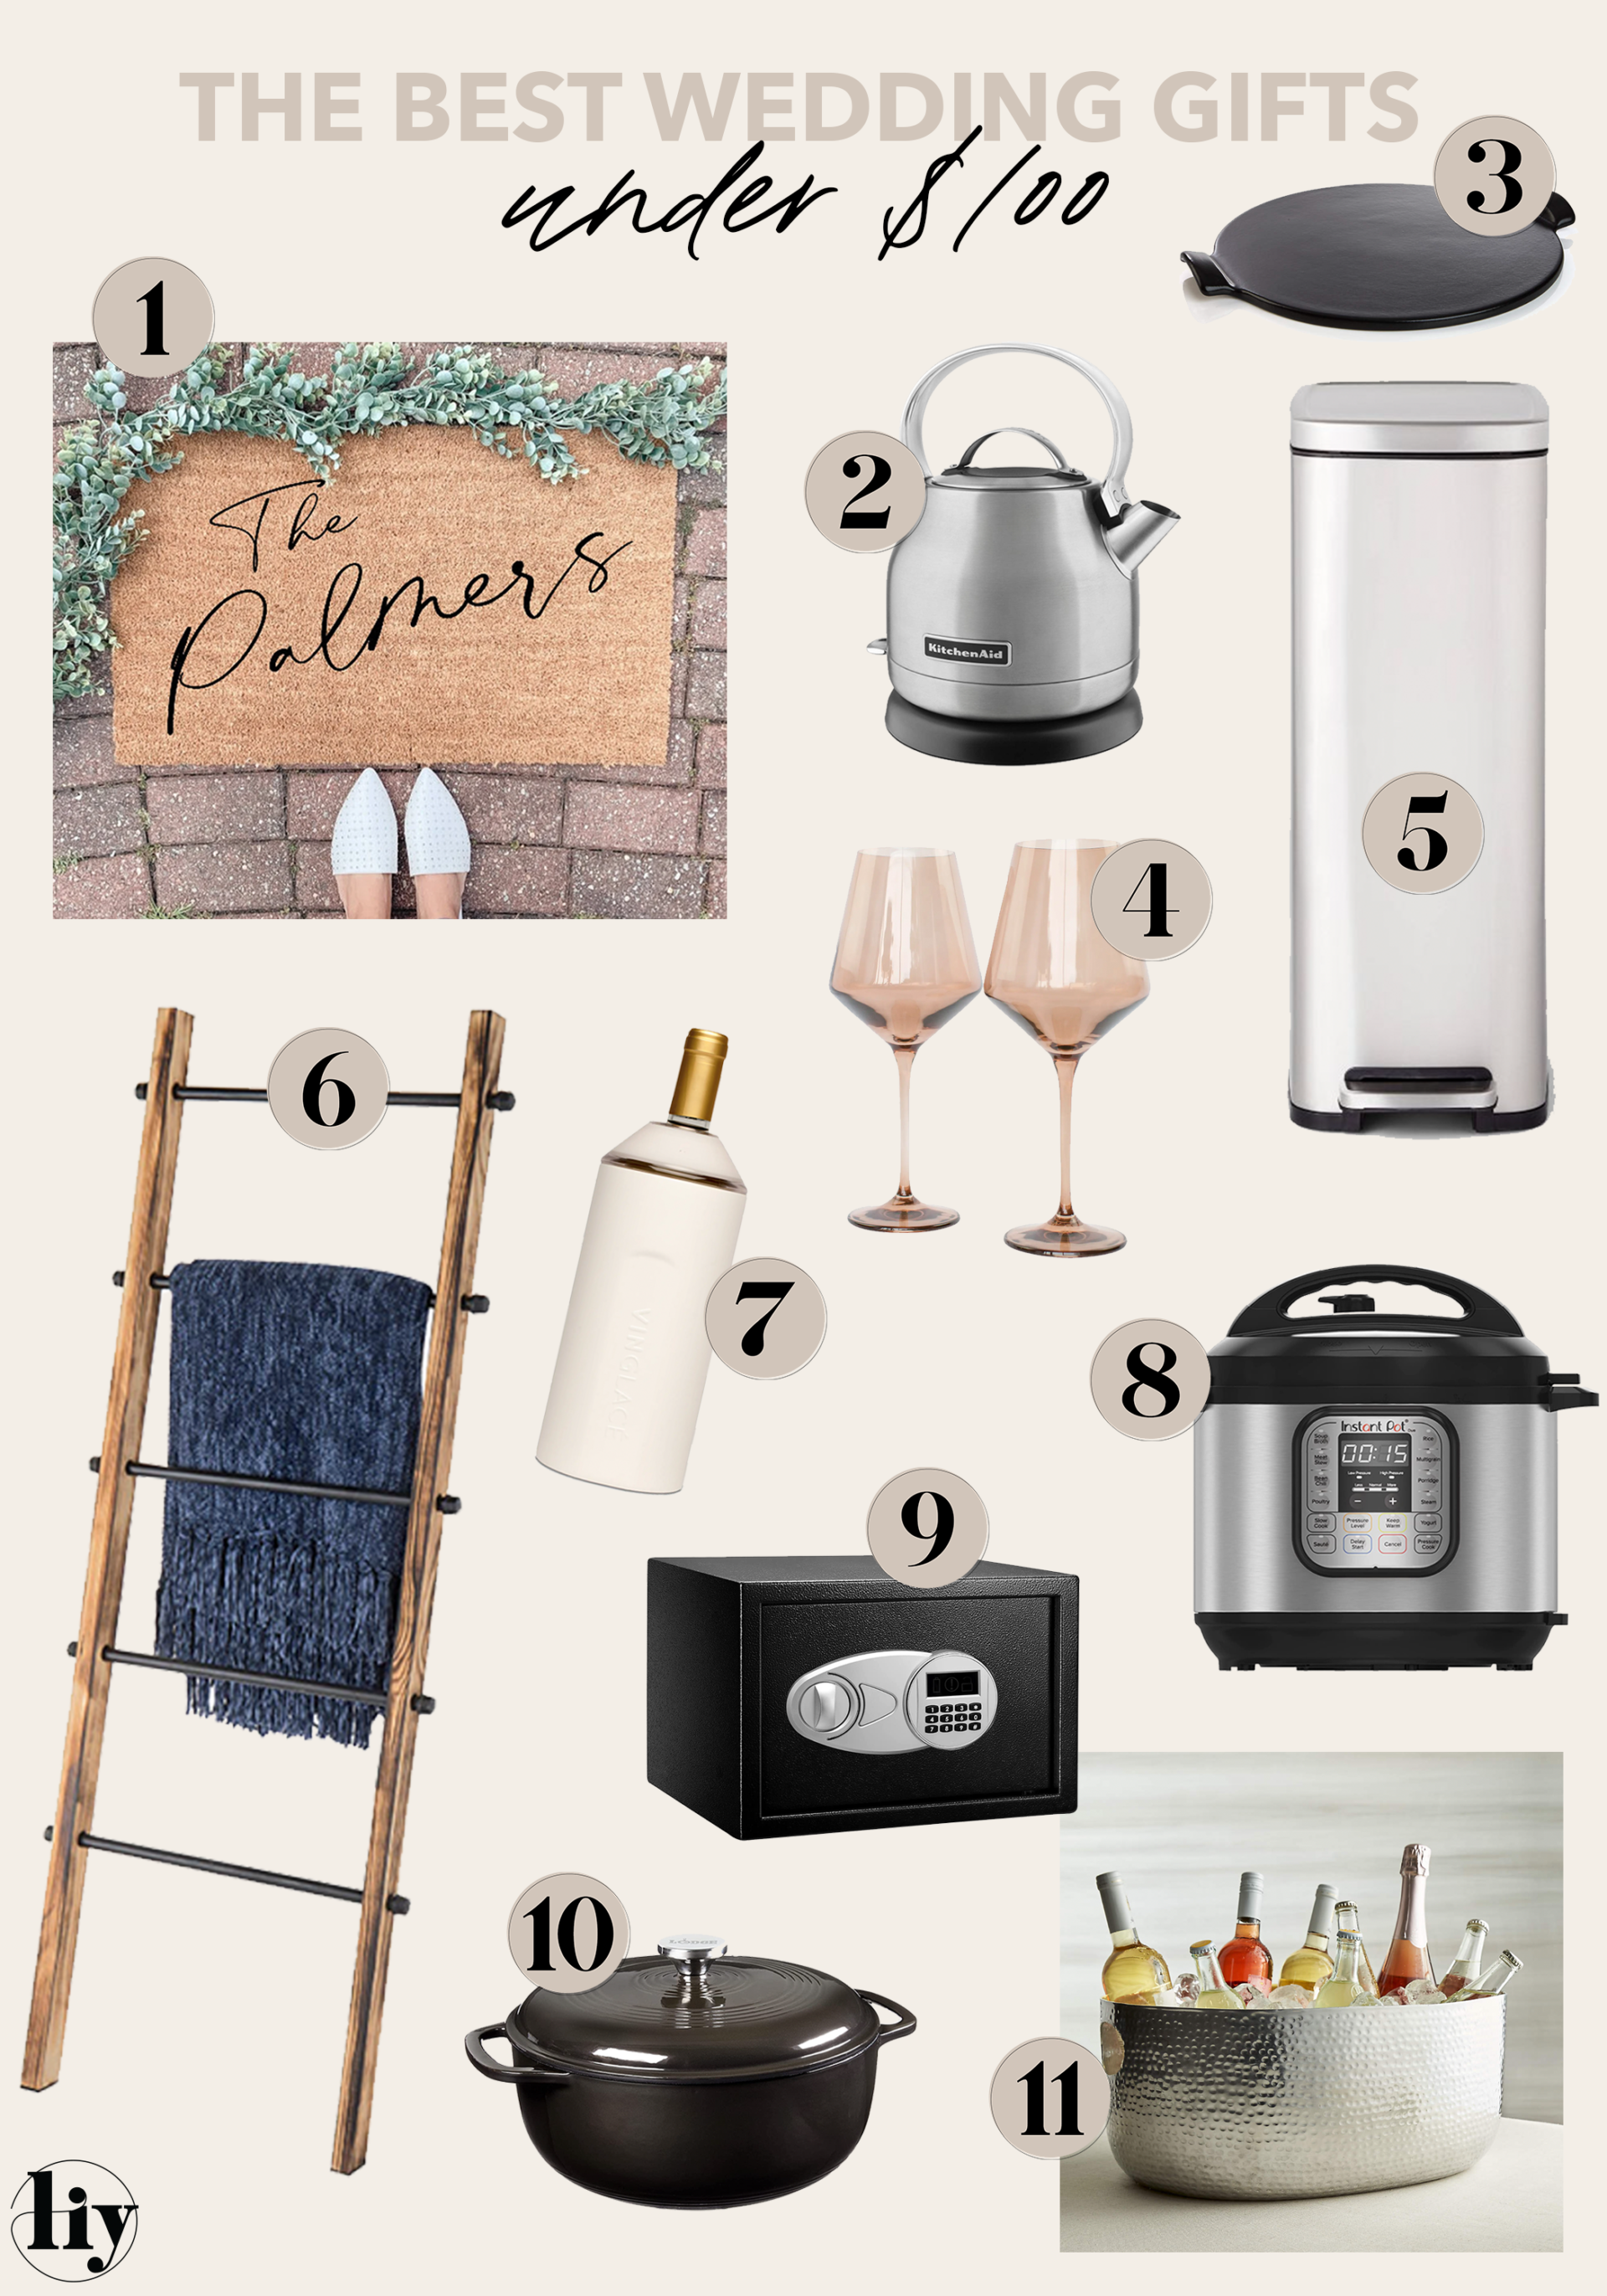 The 12 Most Popular Wedding Registry Gifts of 2022, According to